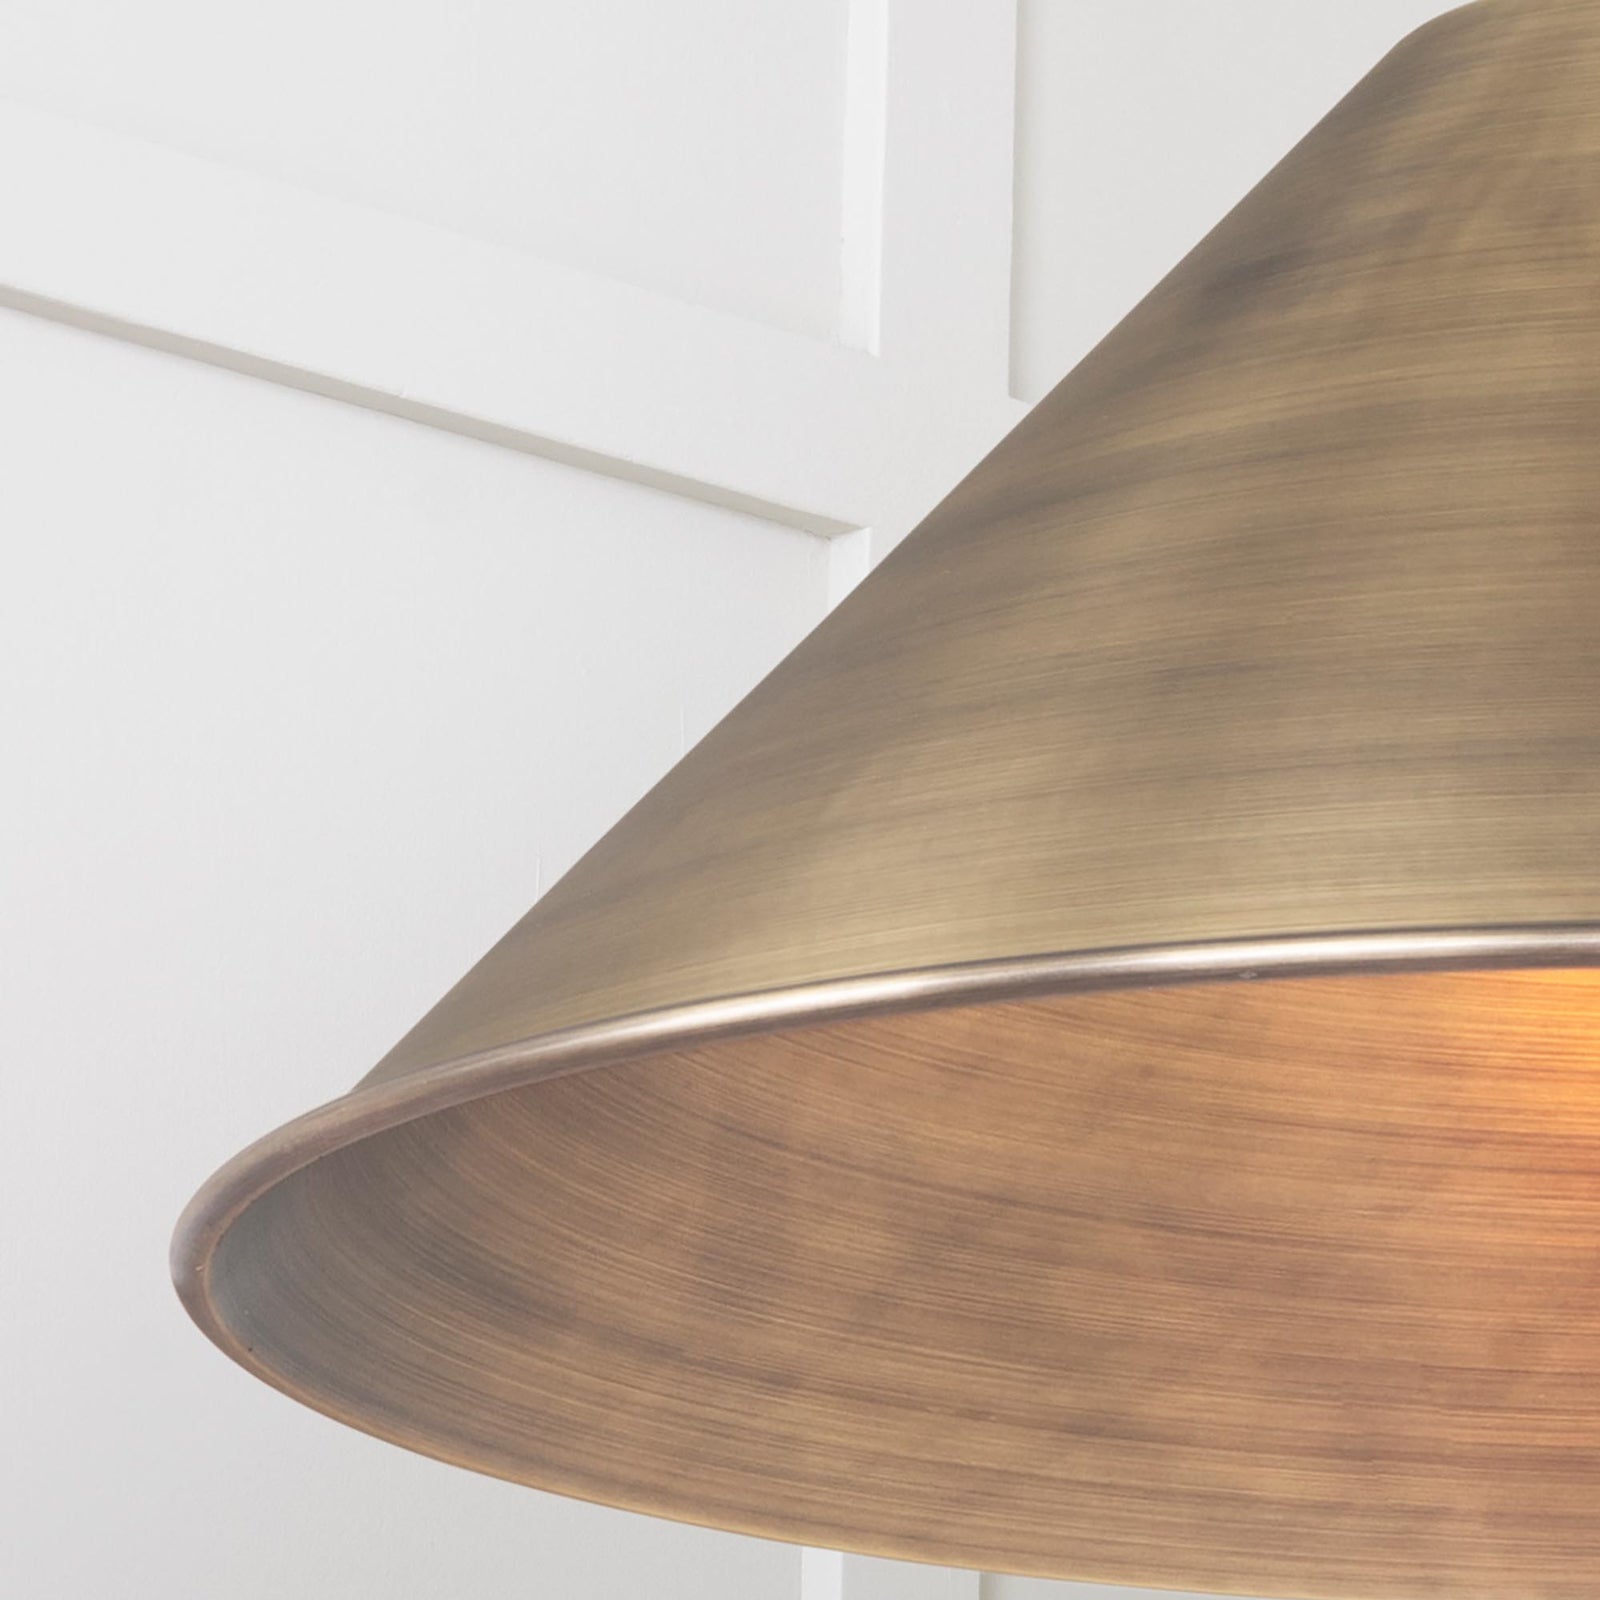 SHOW Close Up Image of Hockley Ceiling Light in Aged Brass